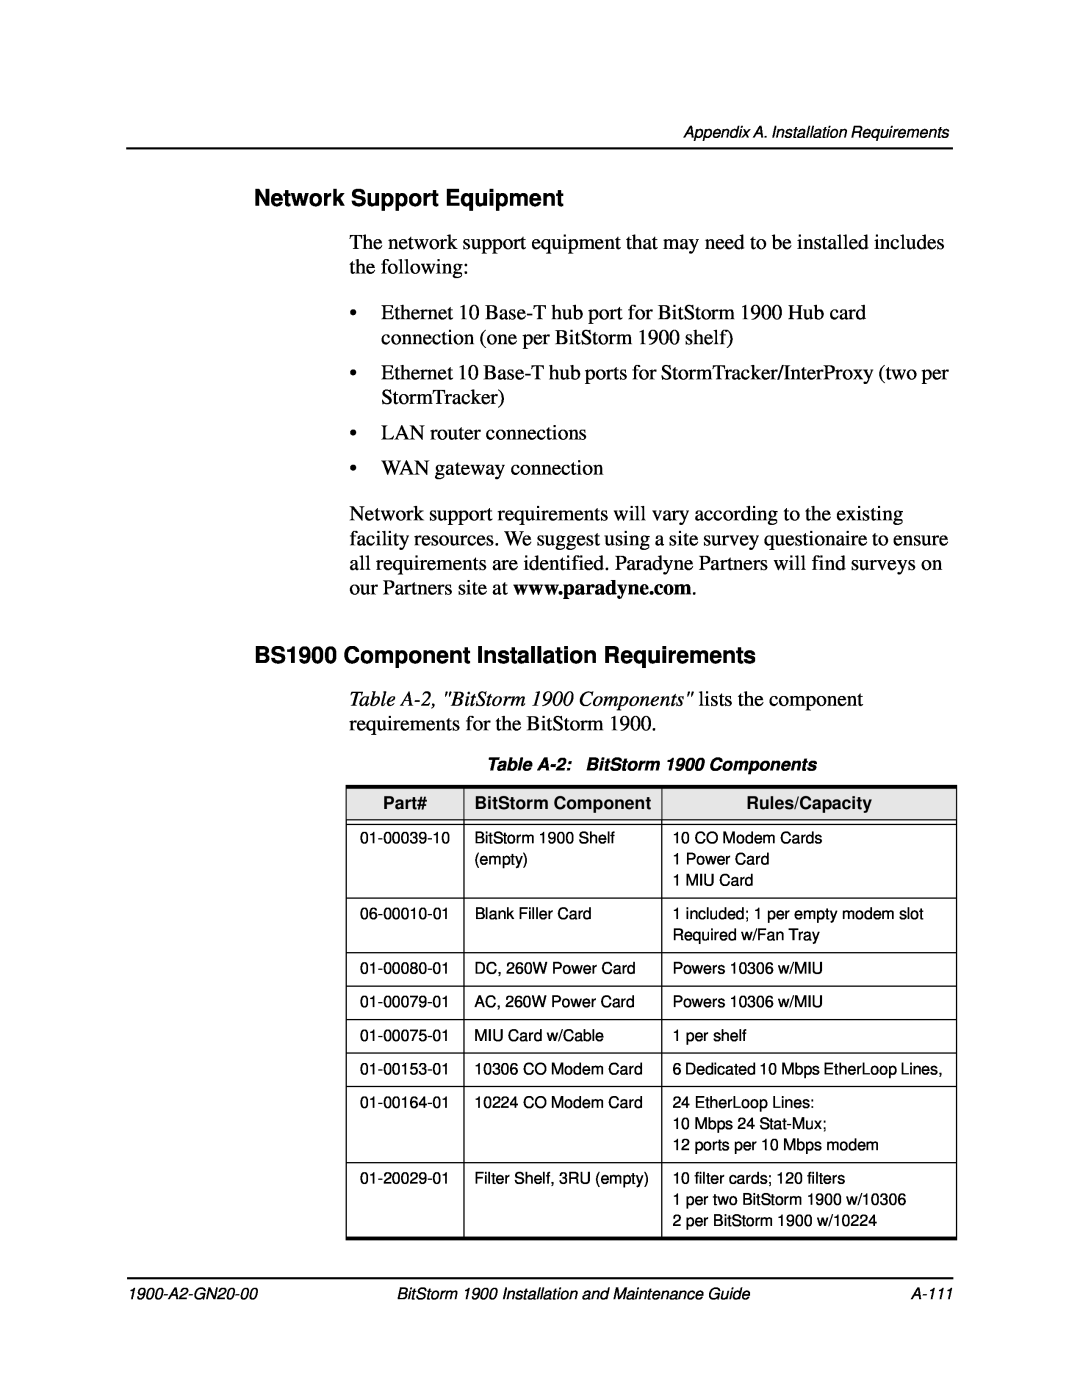 Paradyne manual Network Support Equipment, BS1900 Component Installation Requirements 